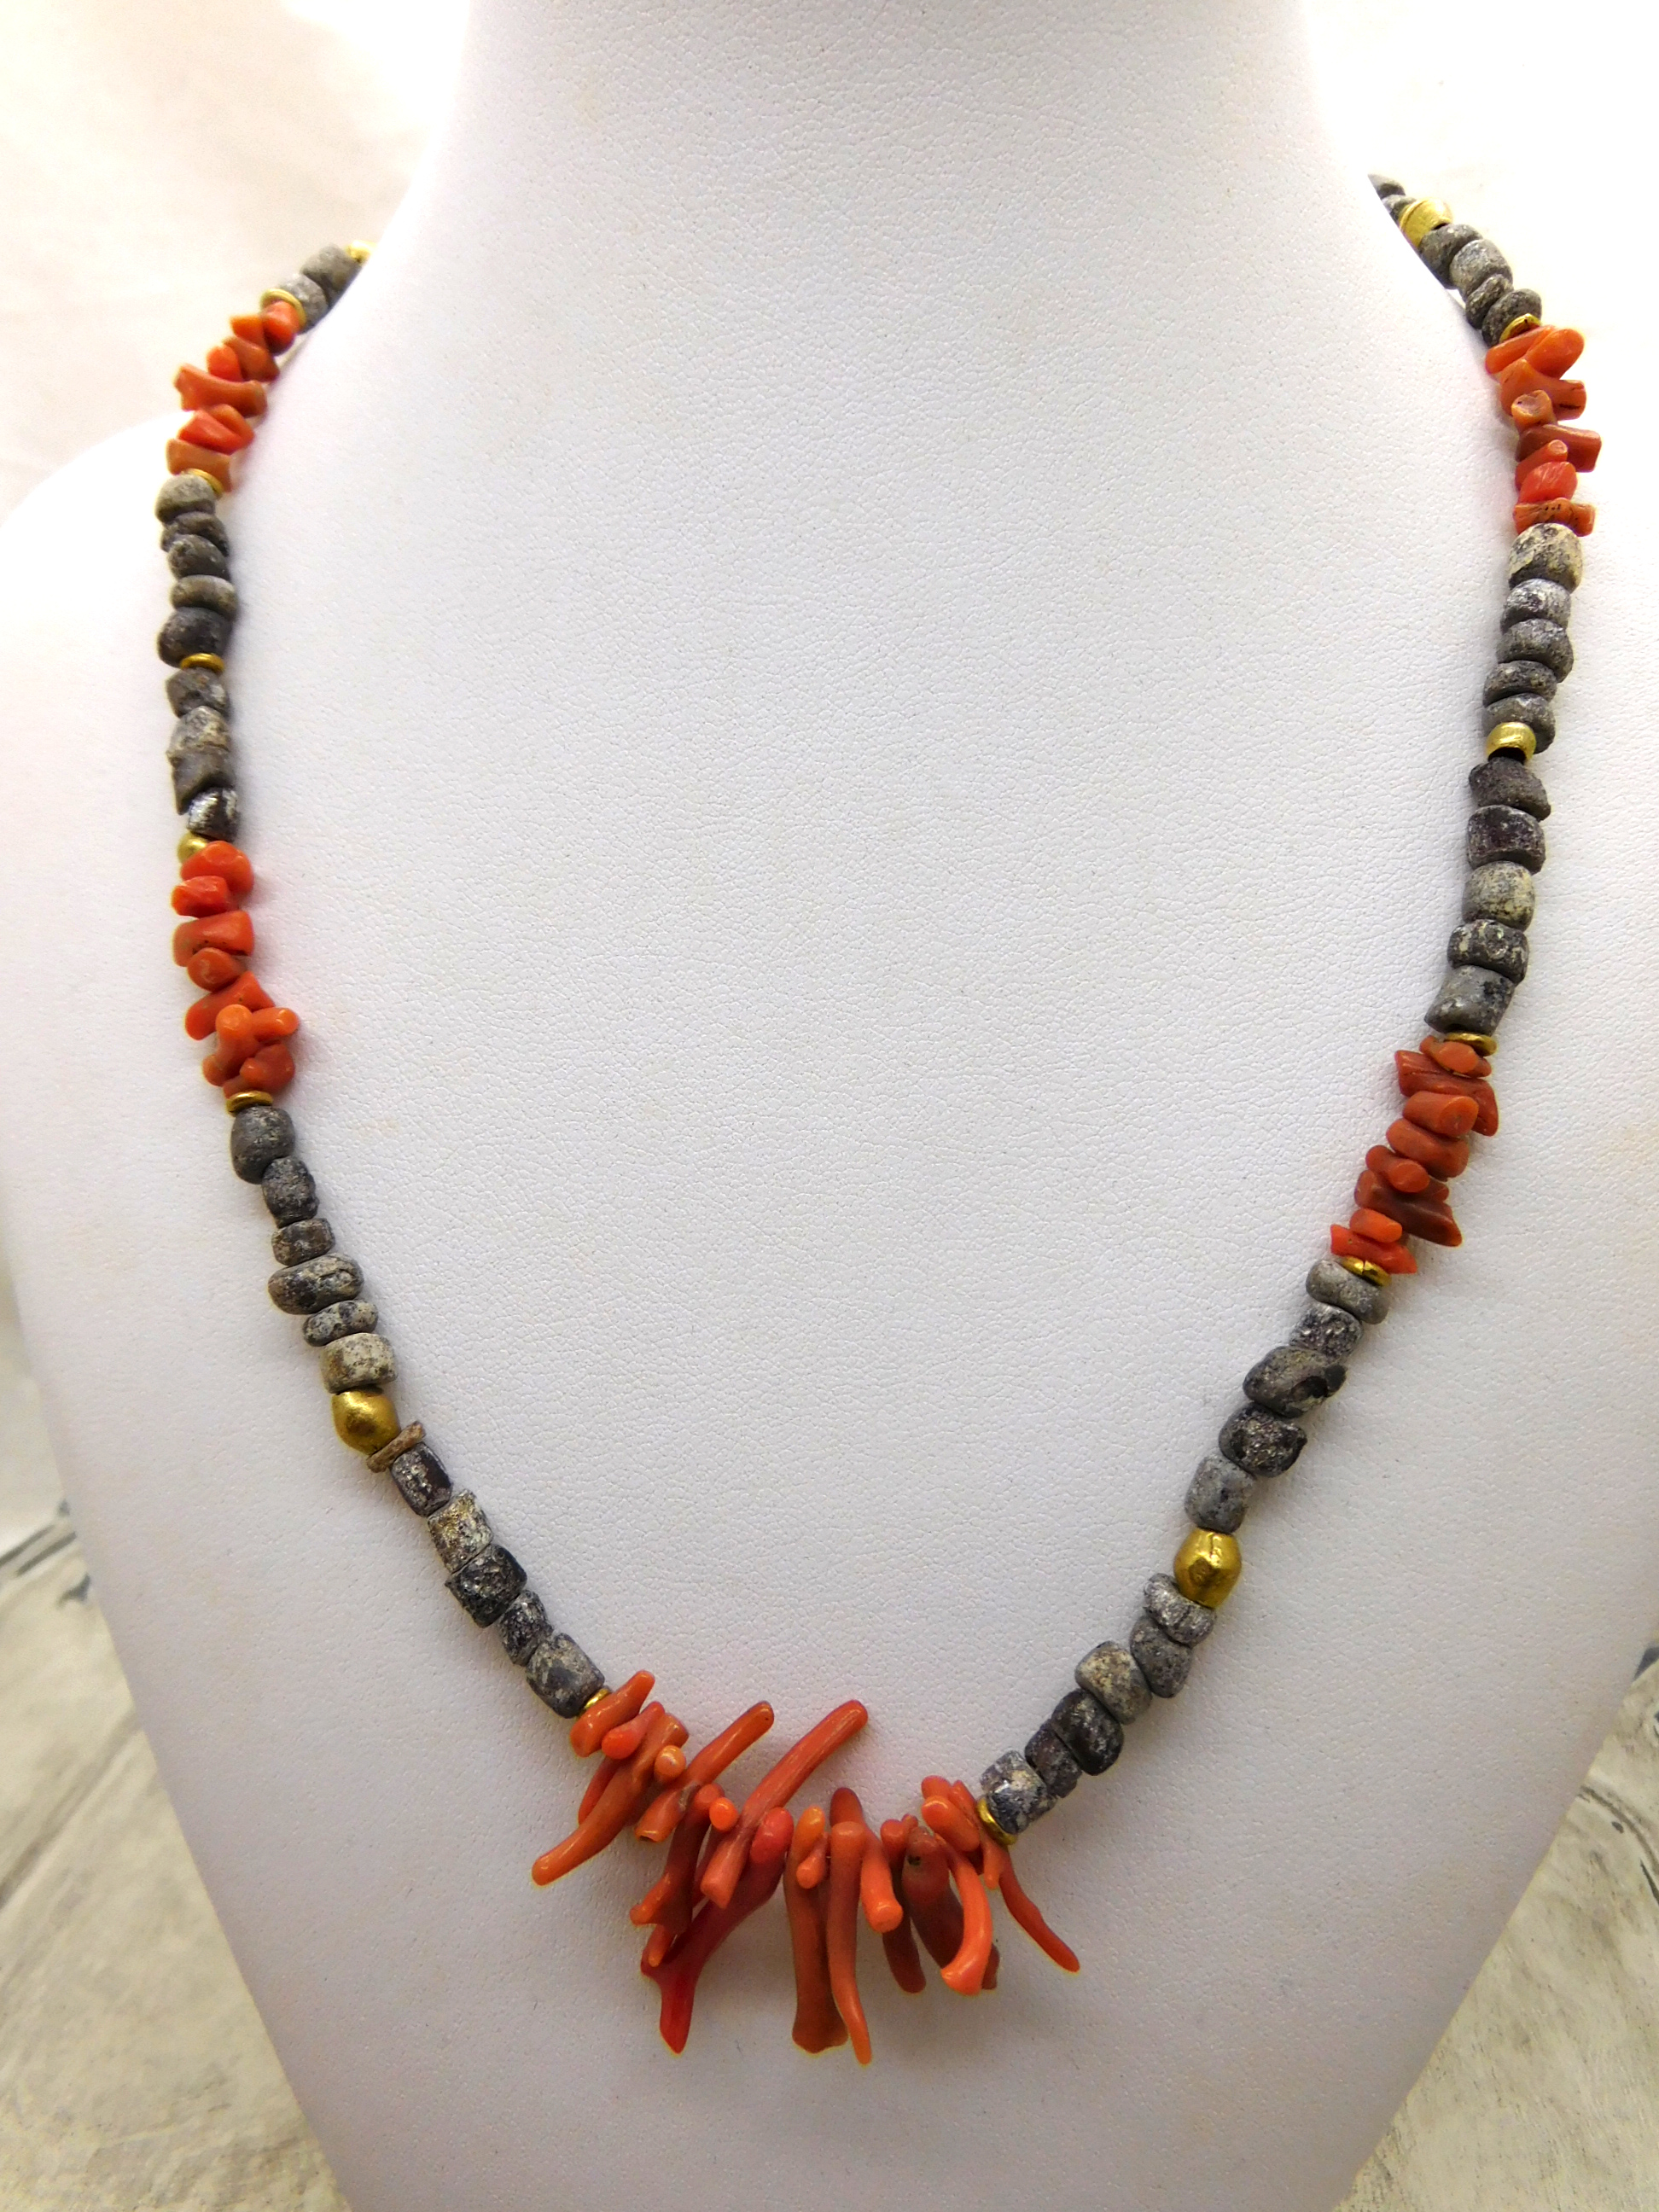 Necklace with antique digbeads from Mali and branch coral from Nigeria